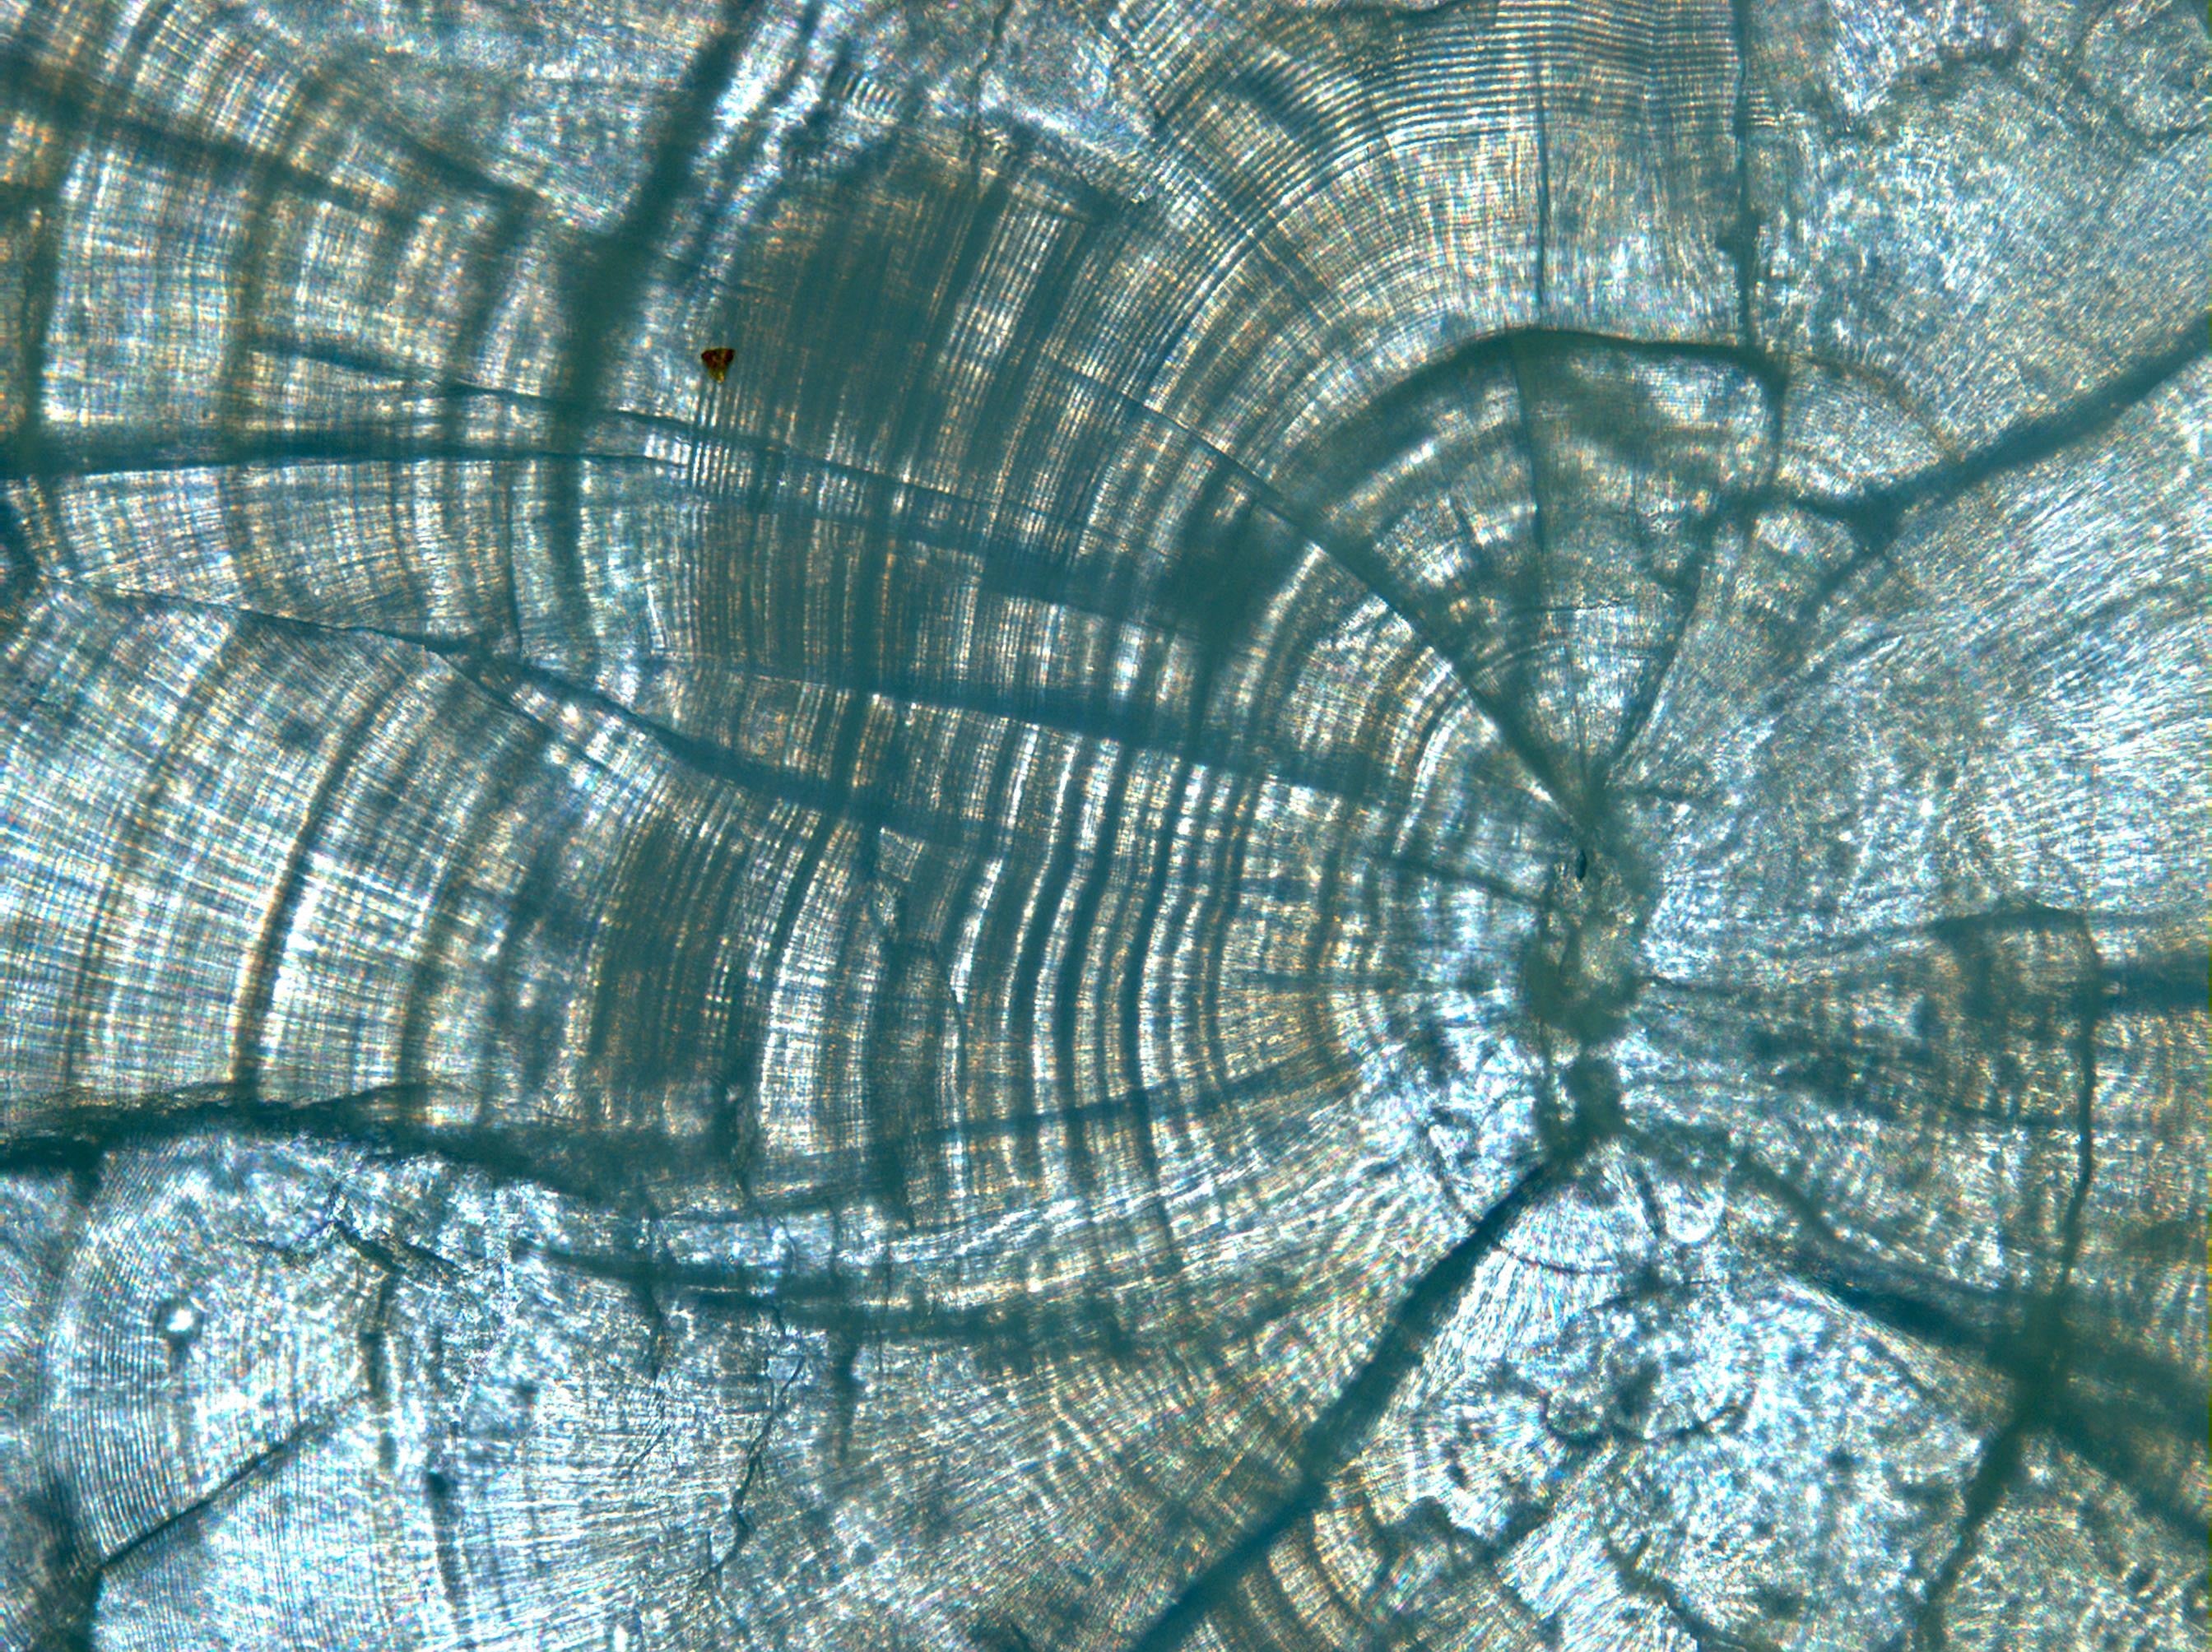 image of Klamath salmon otolith, appearing like white and silver tree rings